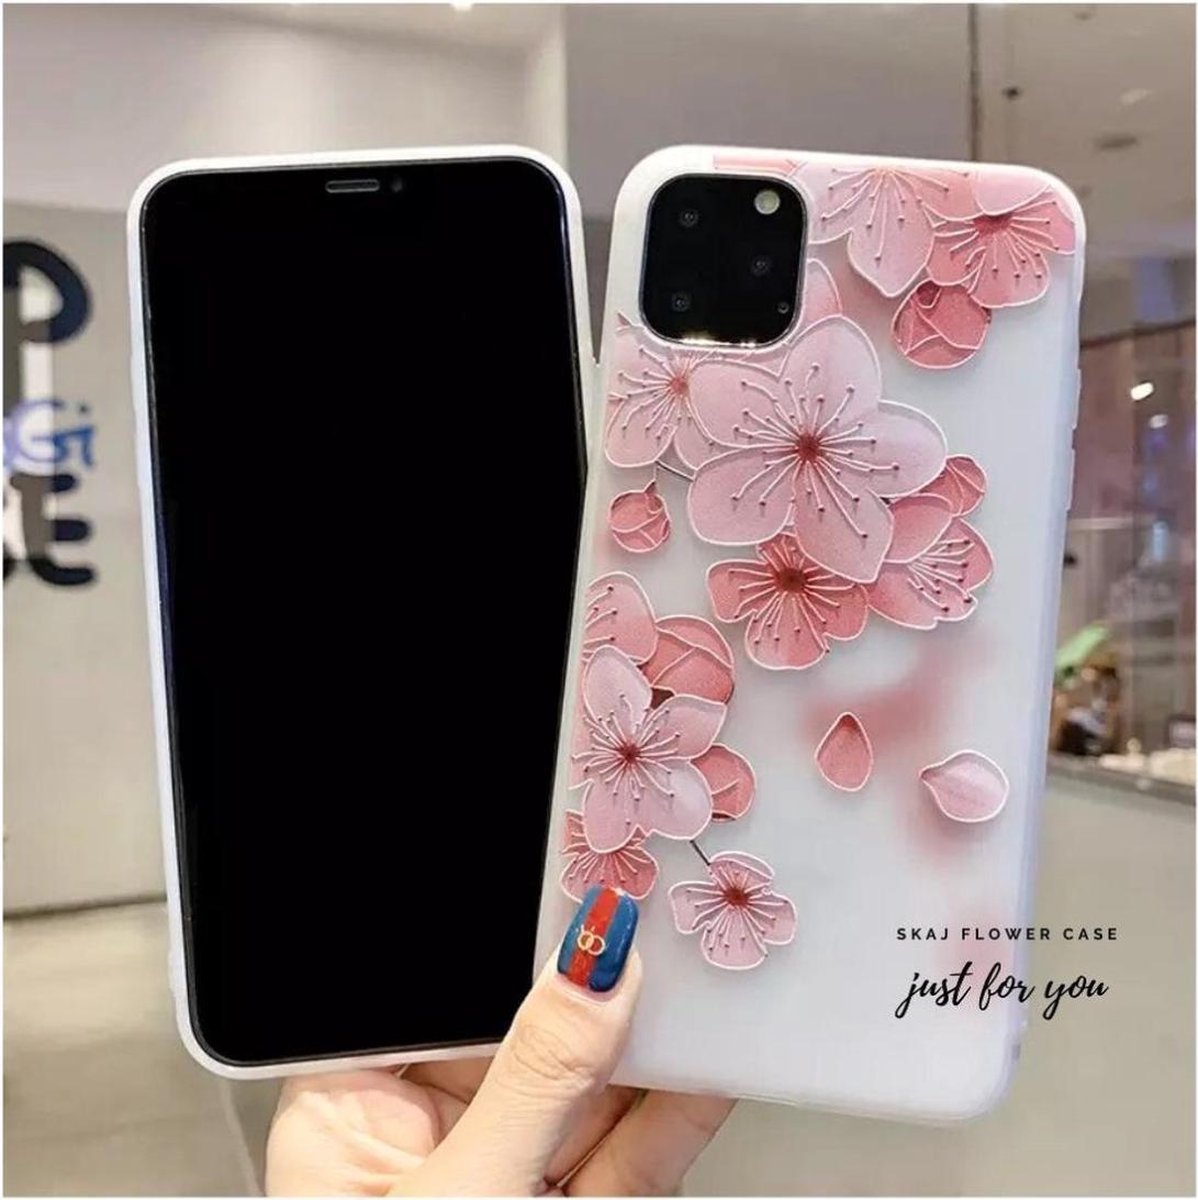 iPhone 6/6s Hoesje Shock Proof Siliconen Hoes Case Cover Transparant - Bloemen